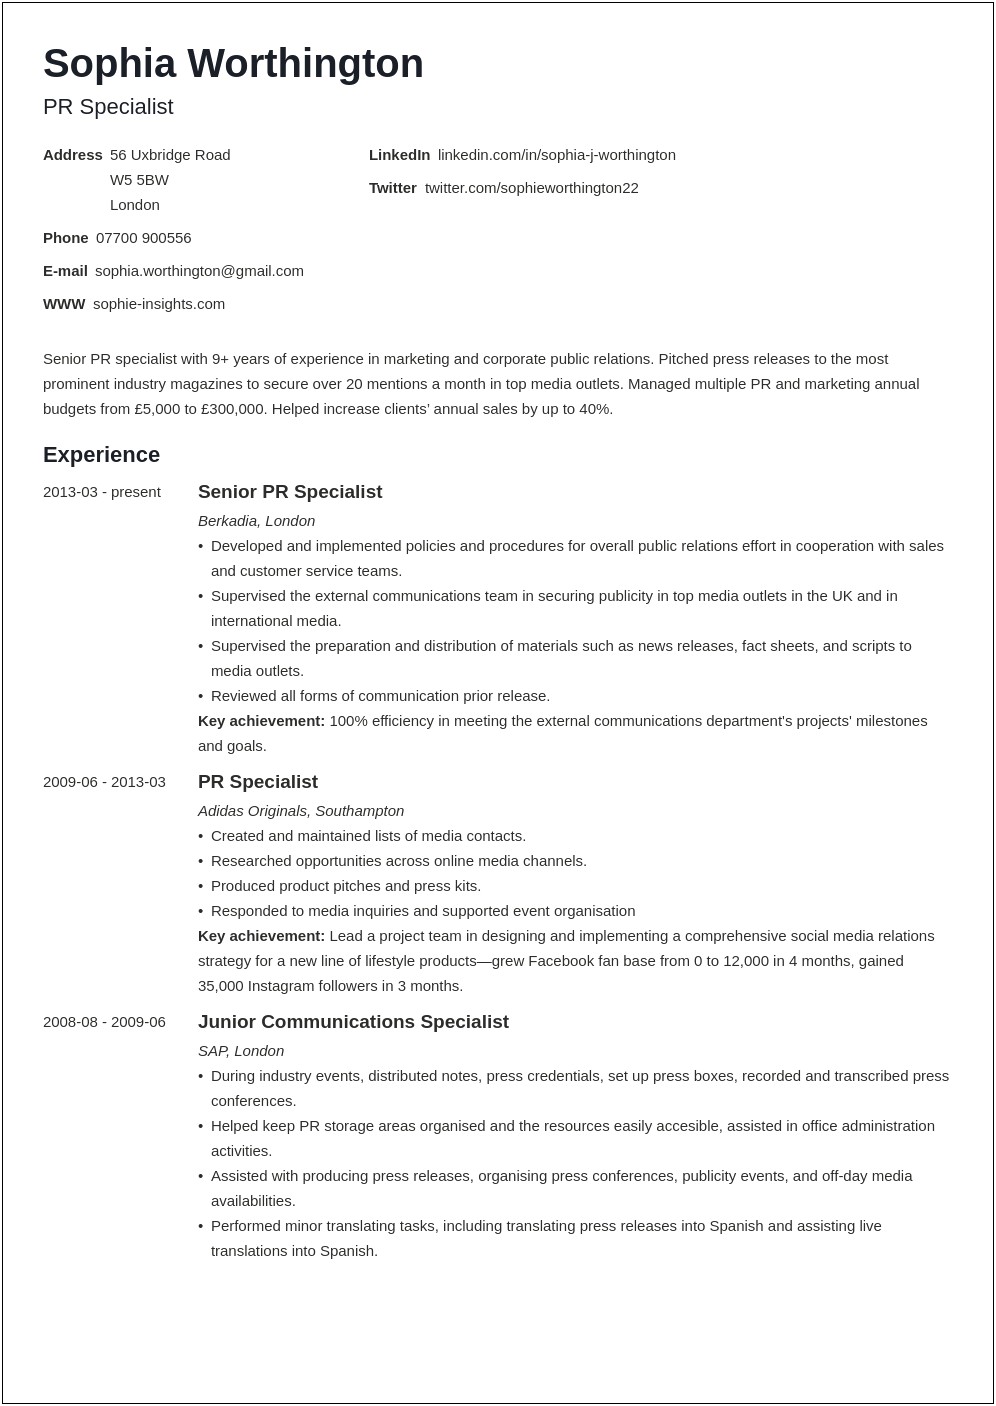 Need Help Making A Resume For A Job